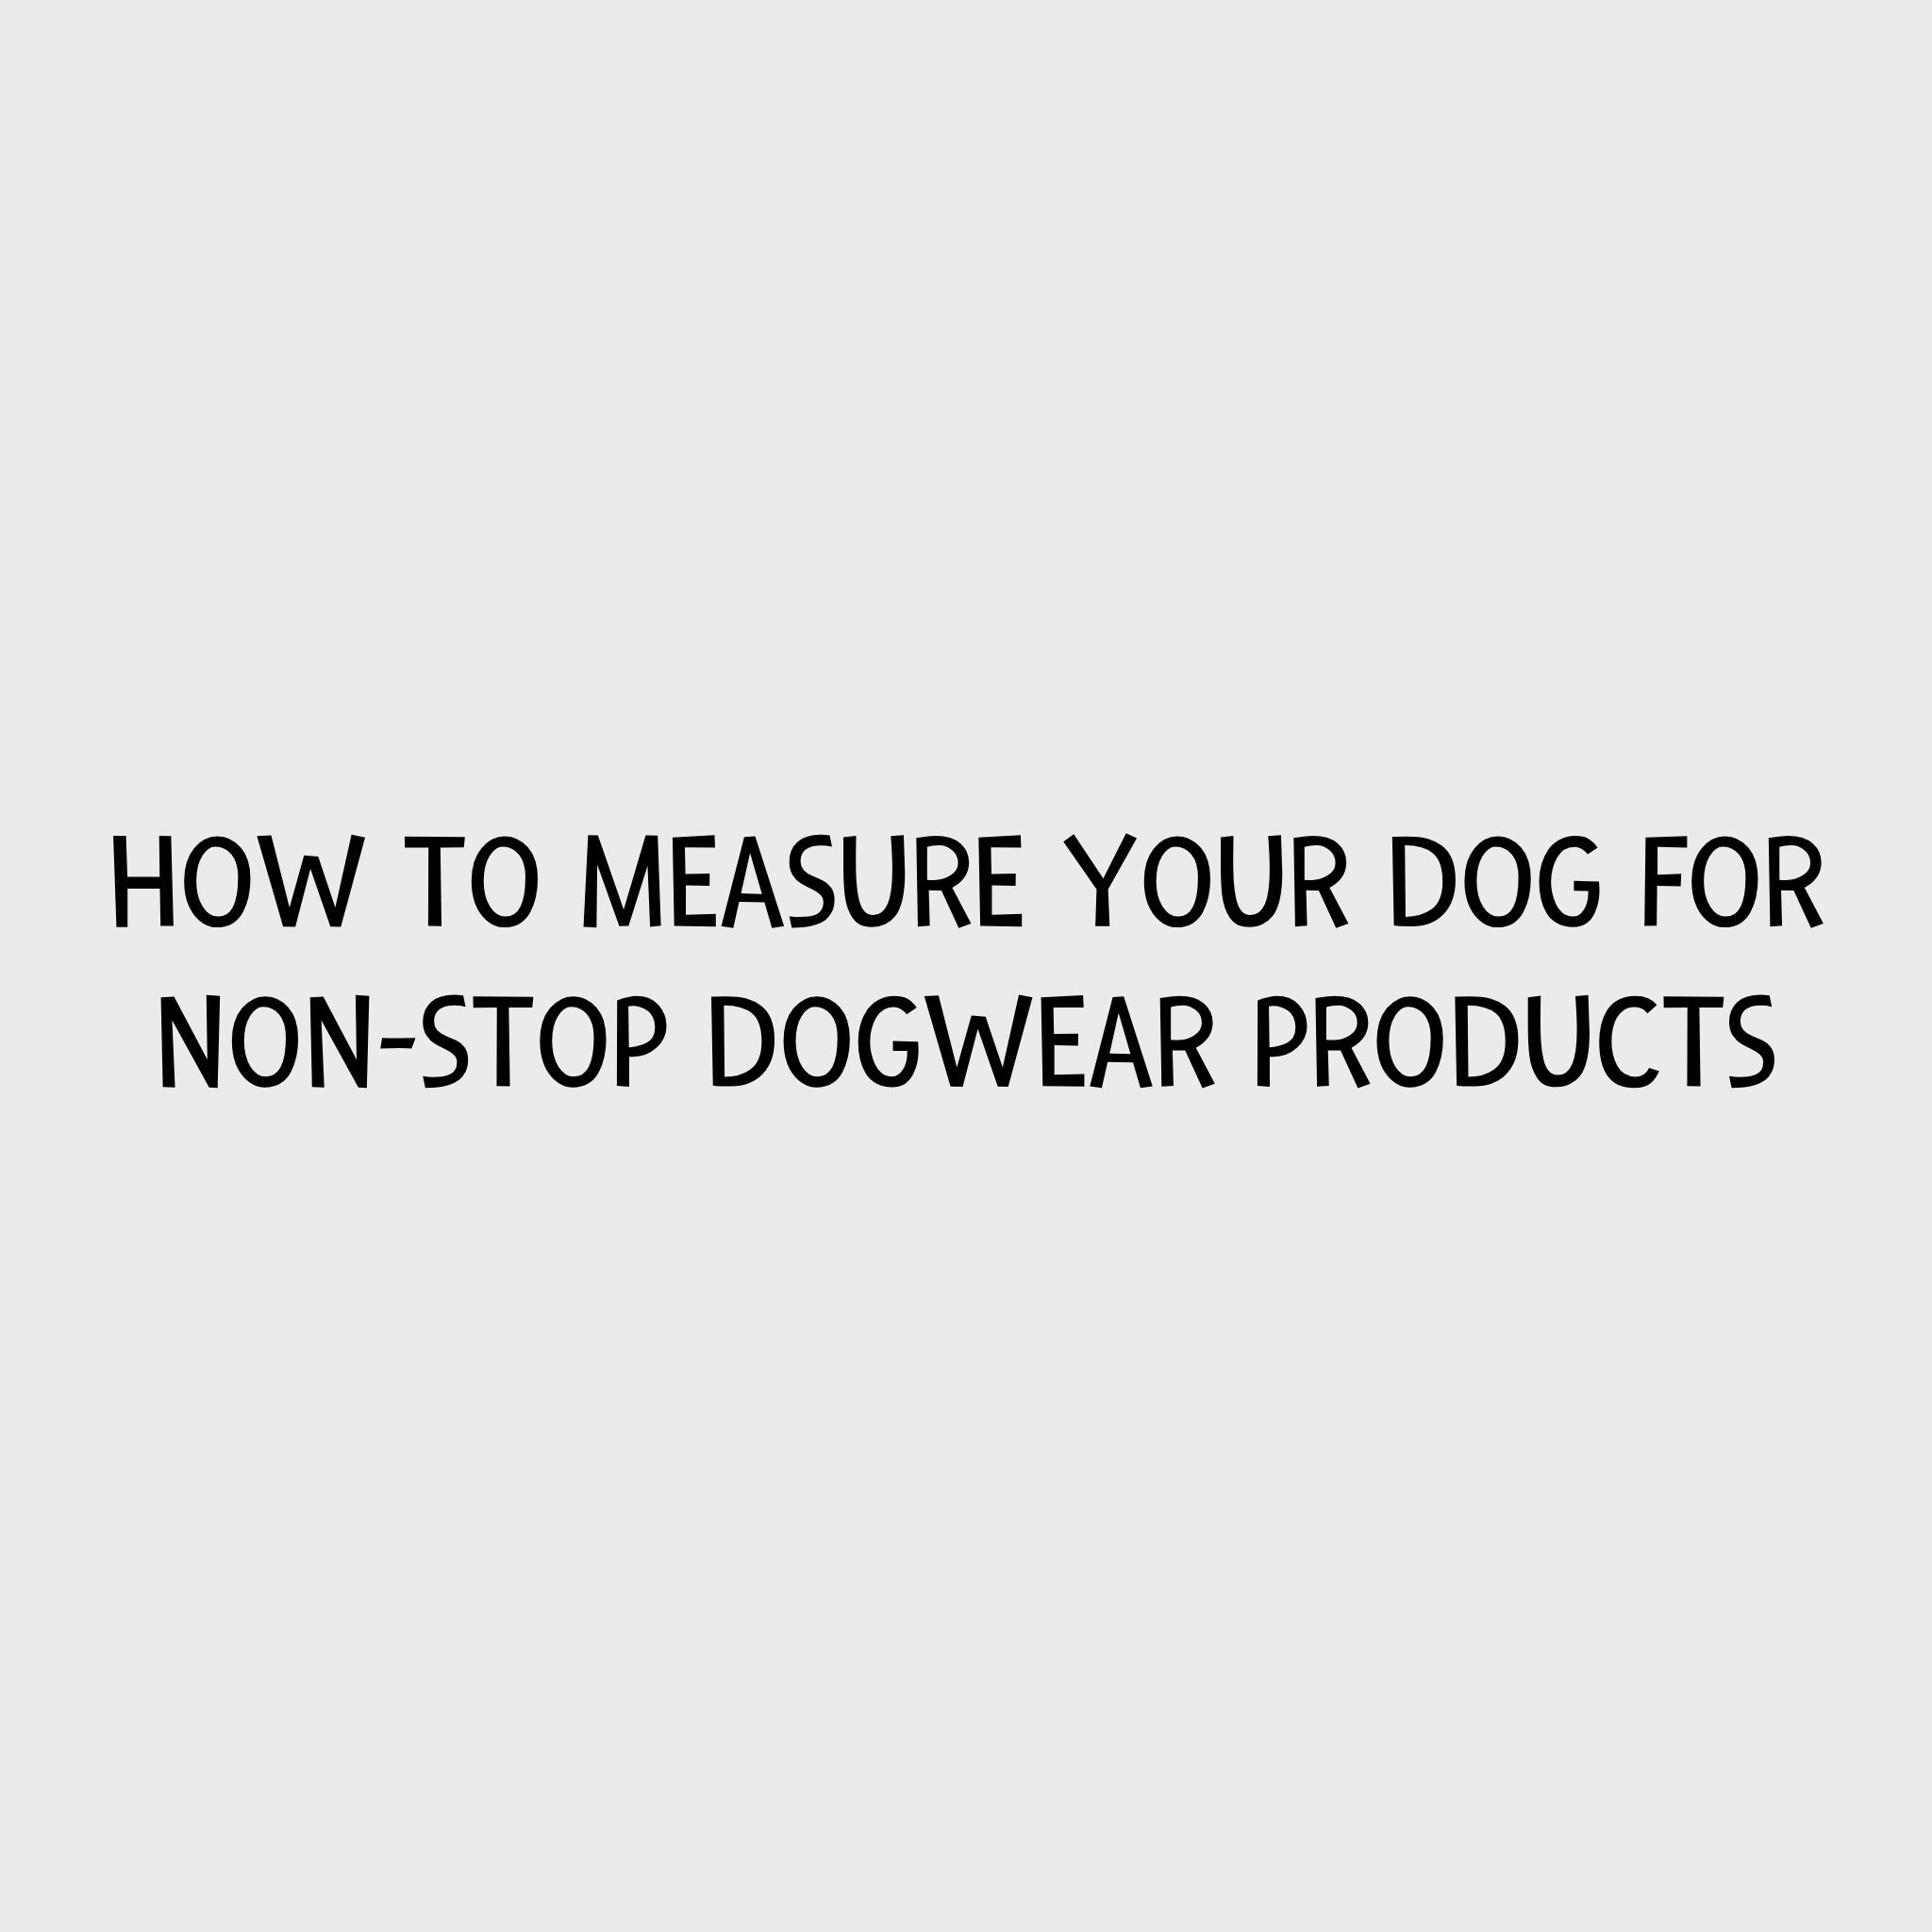 How to measure your dog for Non-stop dogwear products